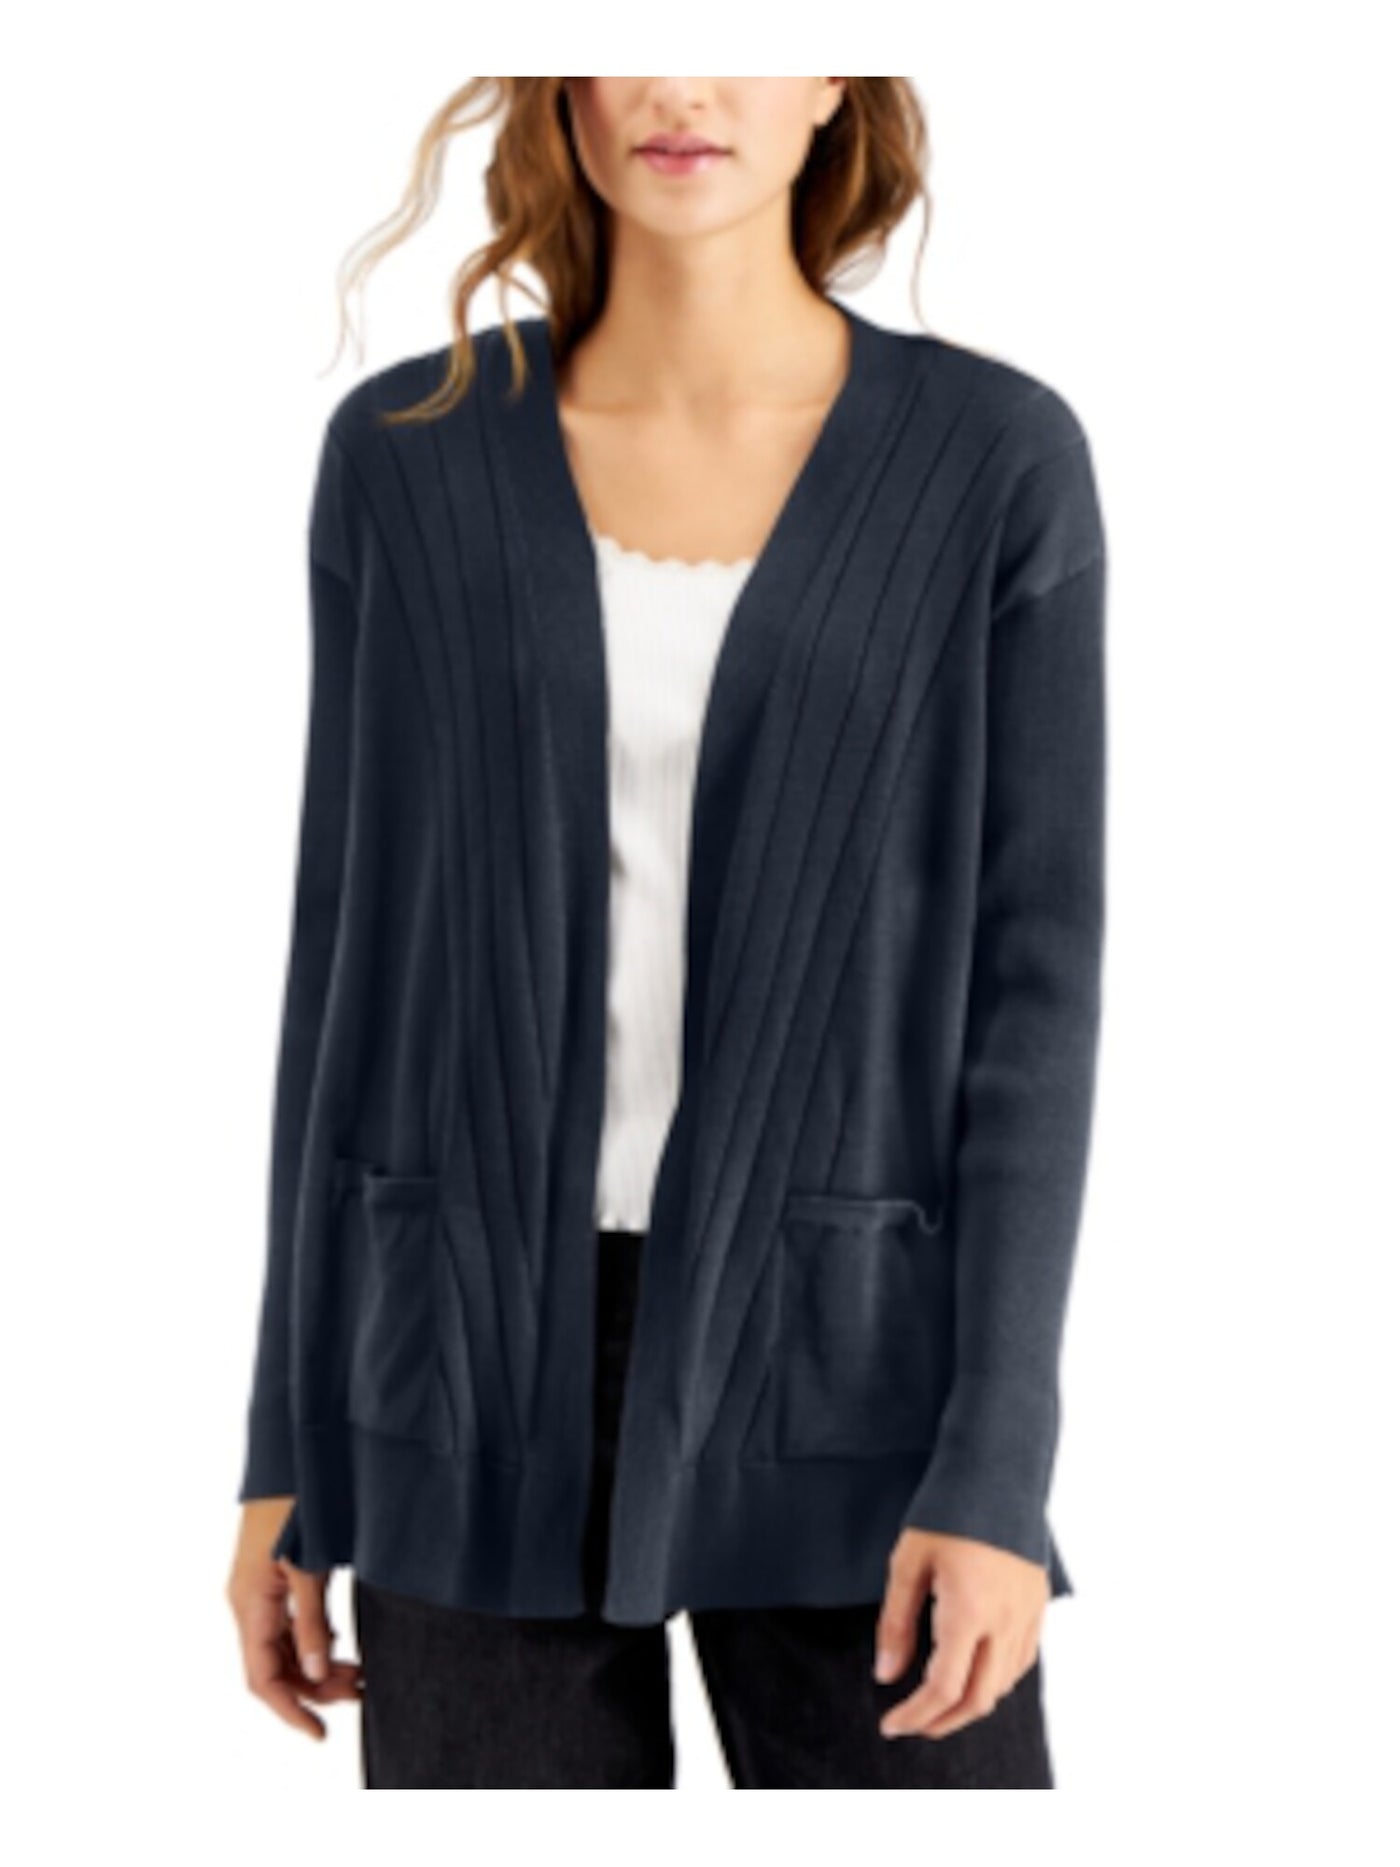 WILLOW DRIVE Womens Navy Pocketed Multi-stitch Long Sleeve Open Cardigan Sweater XS